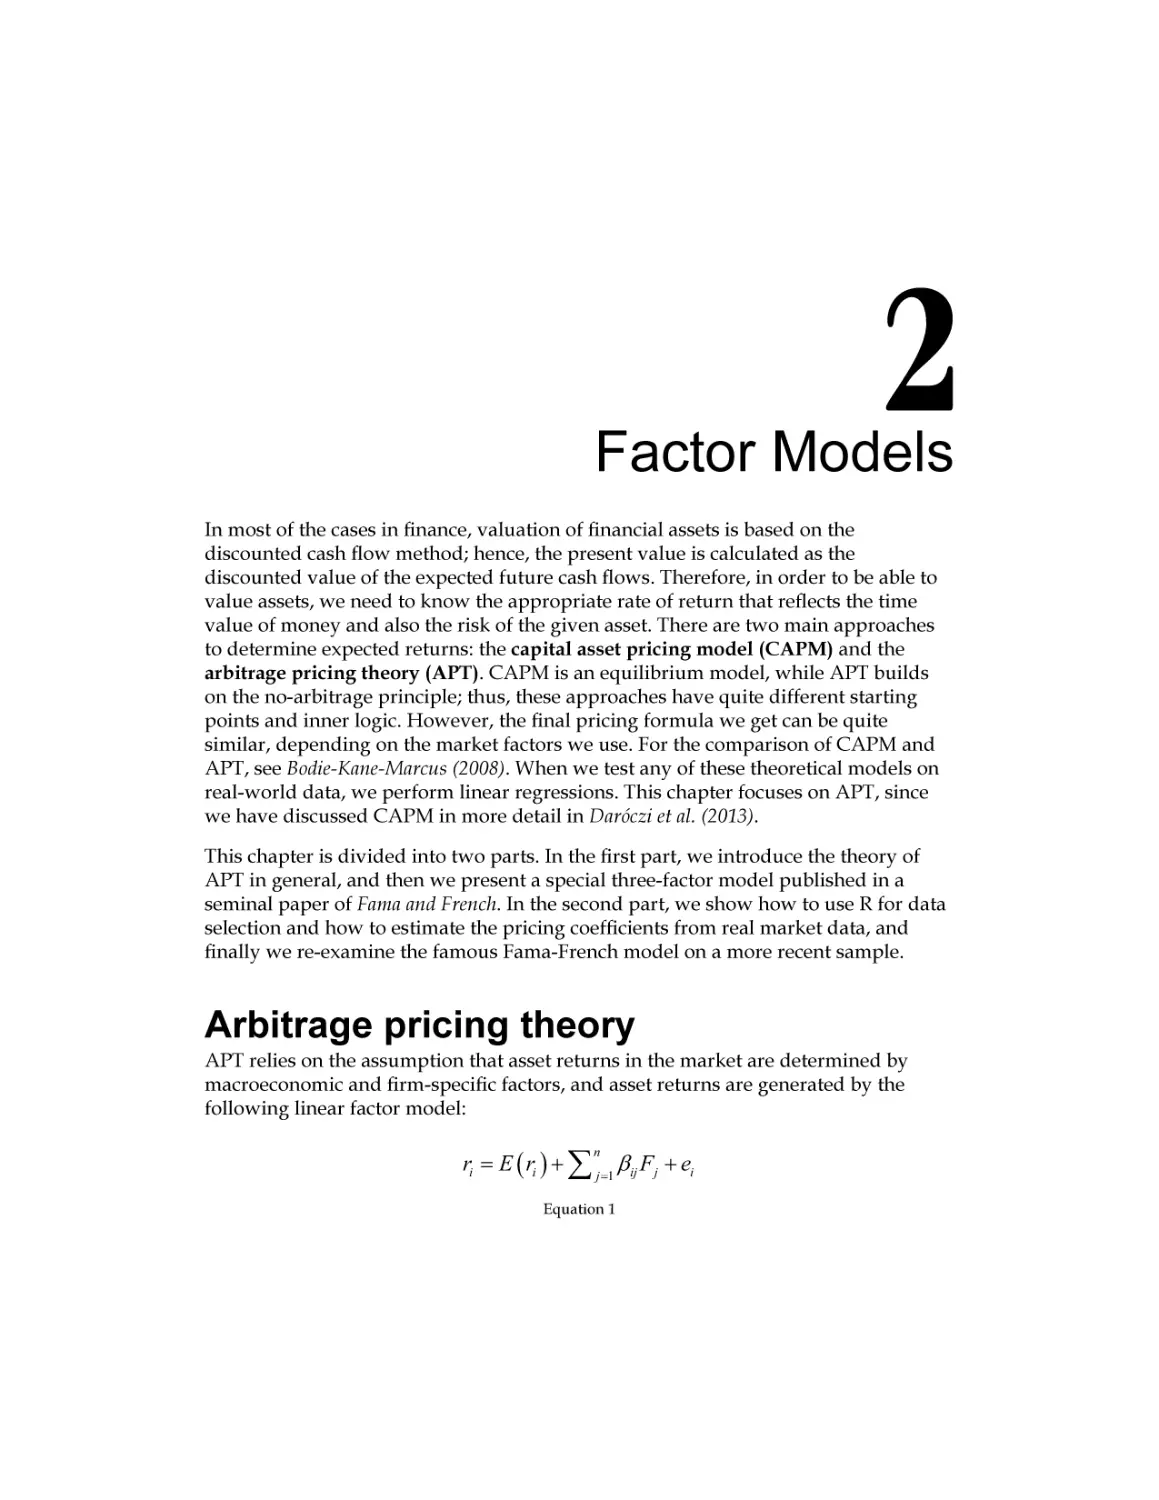 Chapter 2
Arbitrage pricing theory